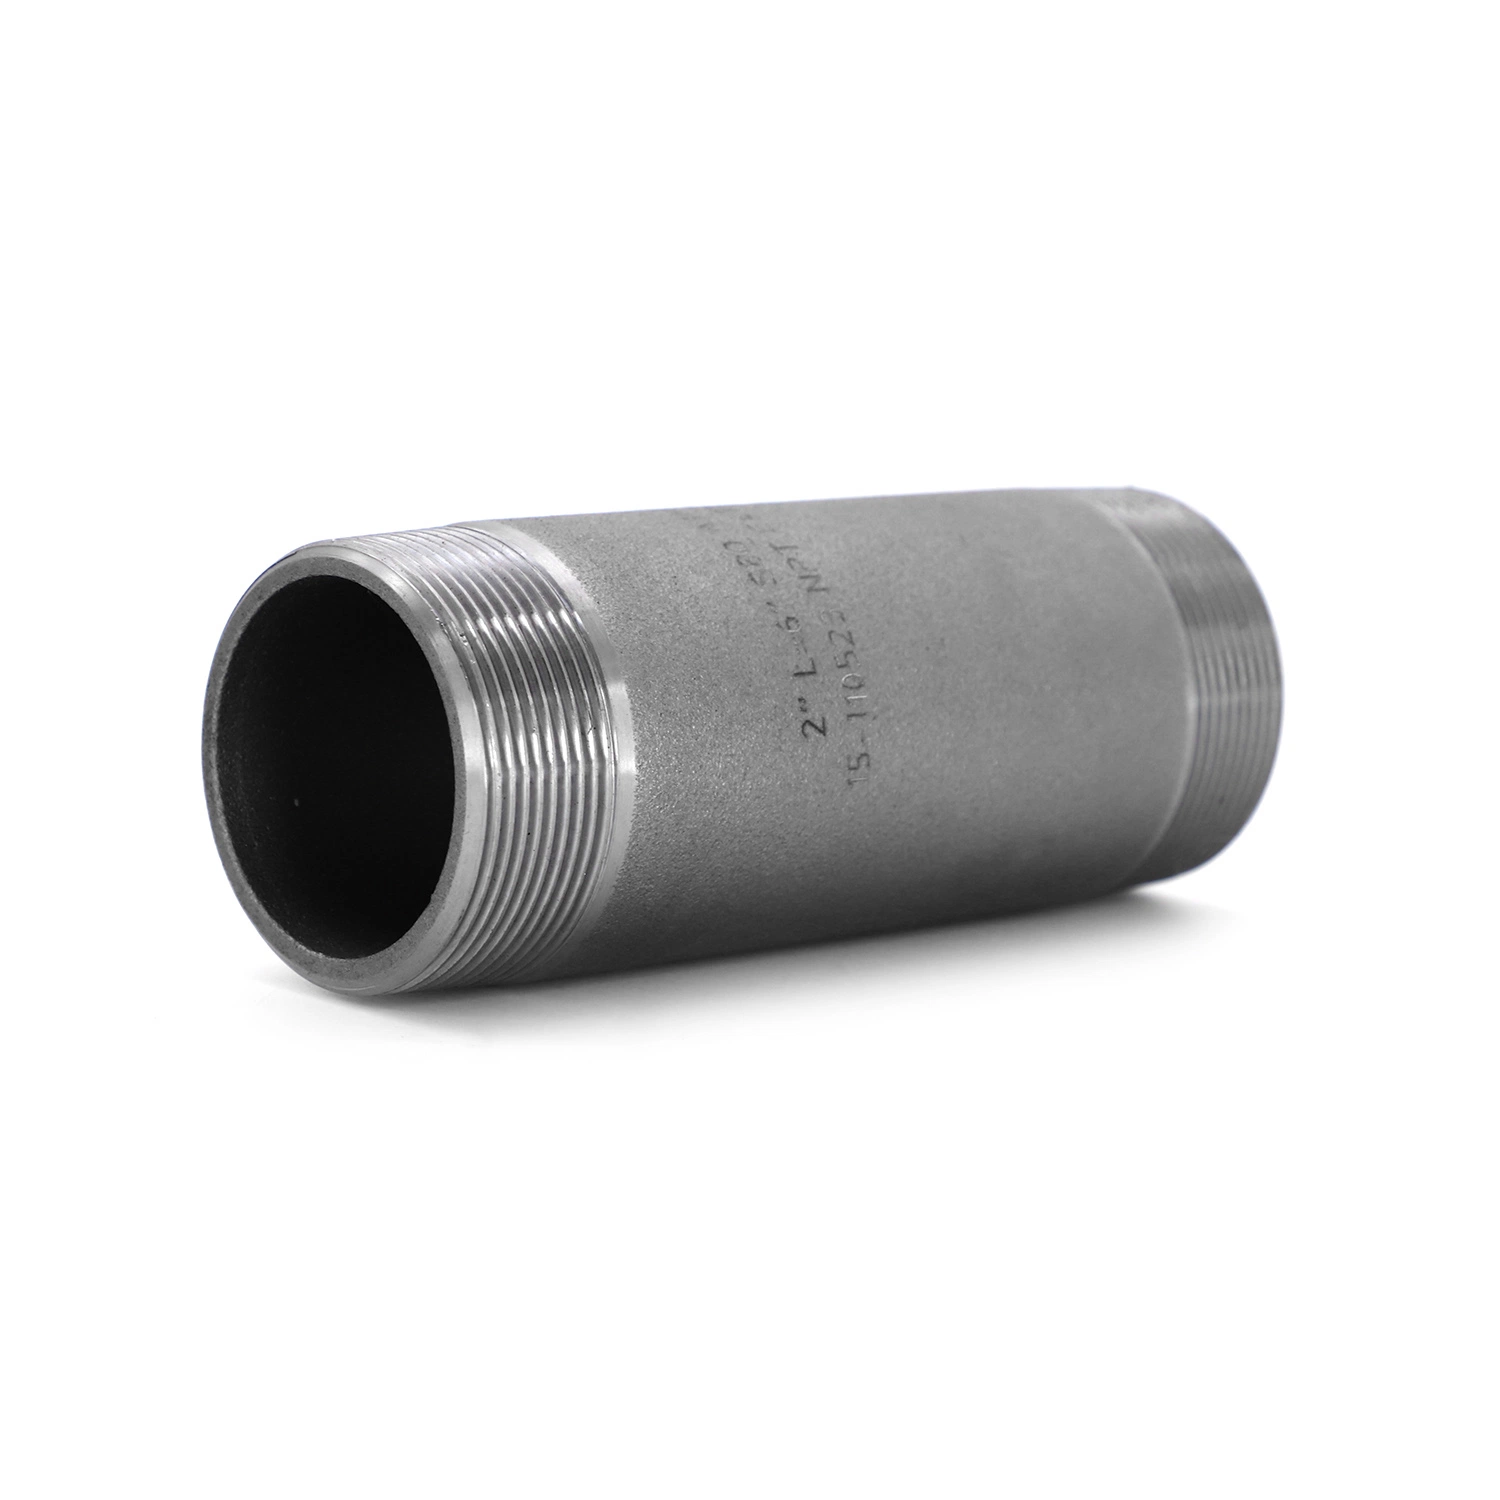 Carbon Steel Stainless Steel Pipe Nipple with American Standard ASTM A733 Sch40 Sch80 Sch160 with Galvanized Black NPT Threaded Barrel Nipple/Hose Nipple